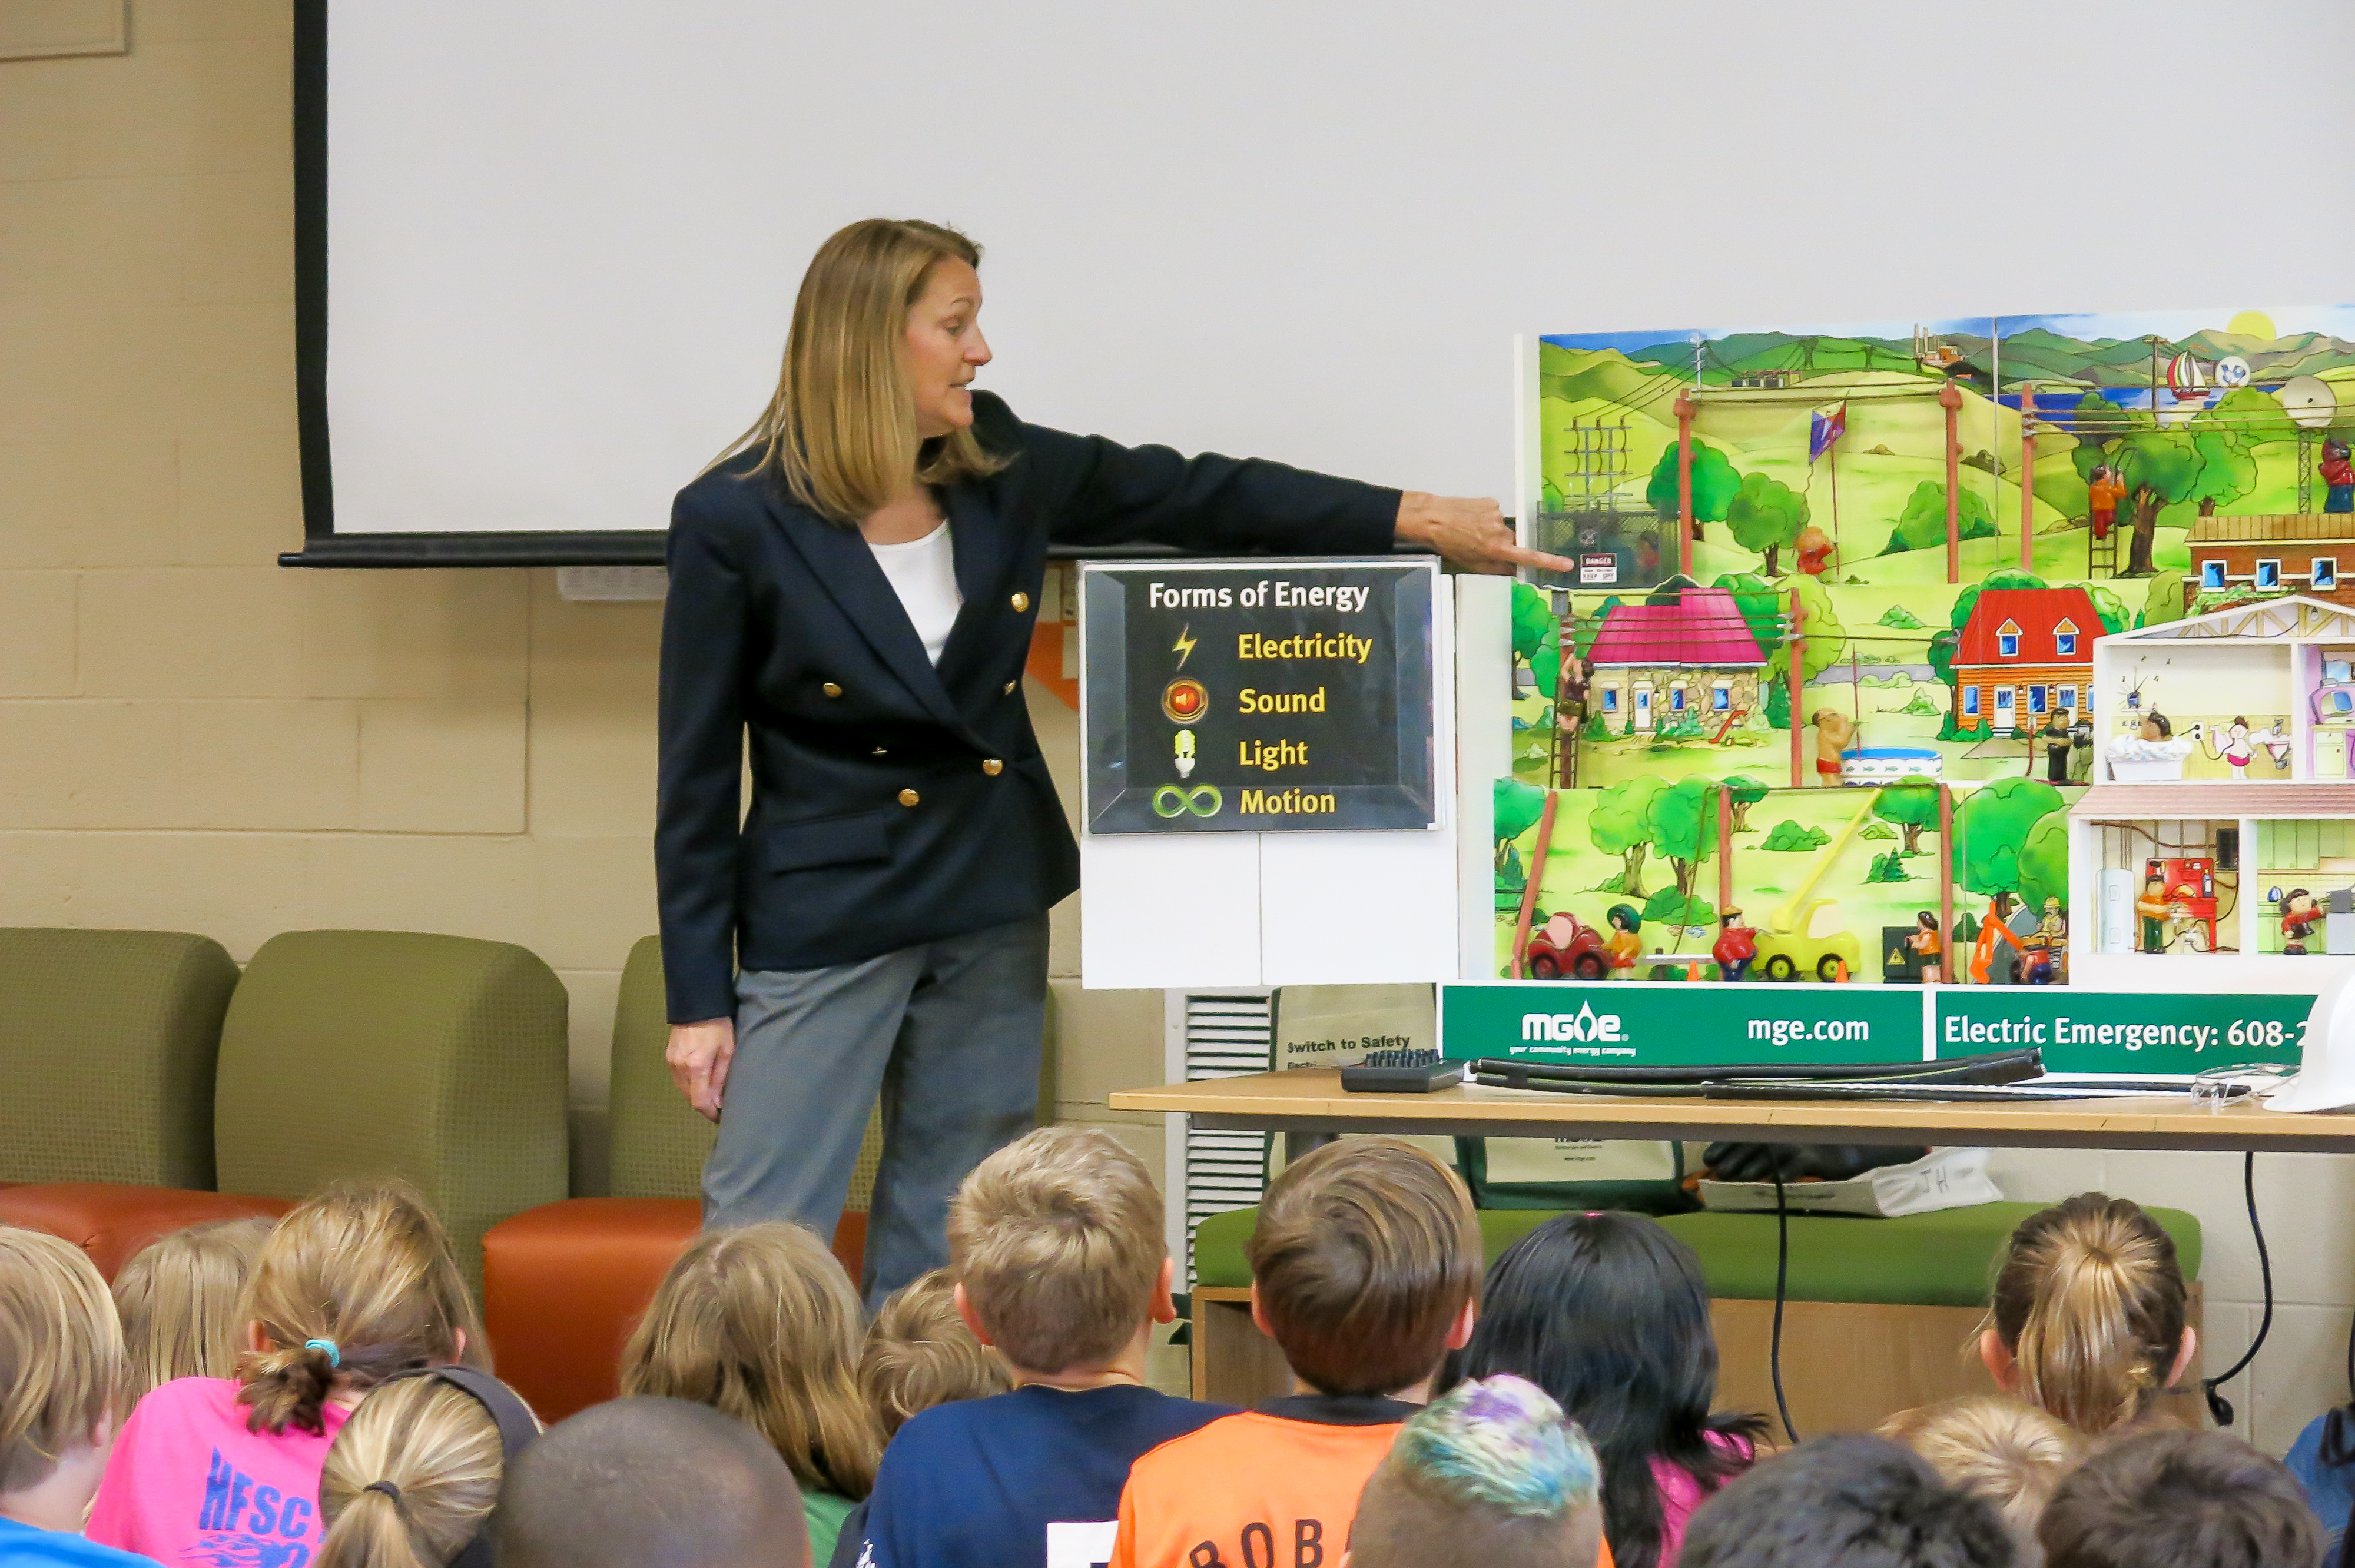 Flossie points to Hazard Hamlet, an energized tabletop city, explaining electric safety scenarios to a group of students.